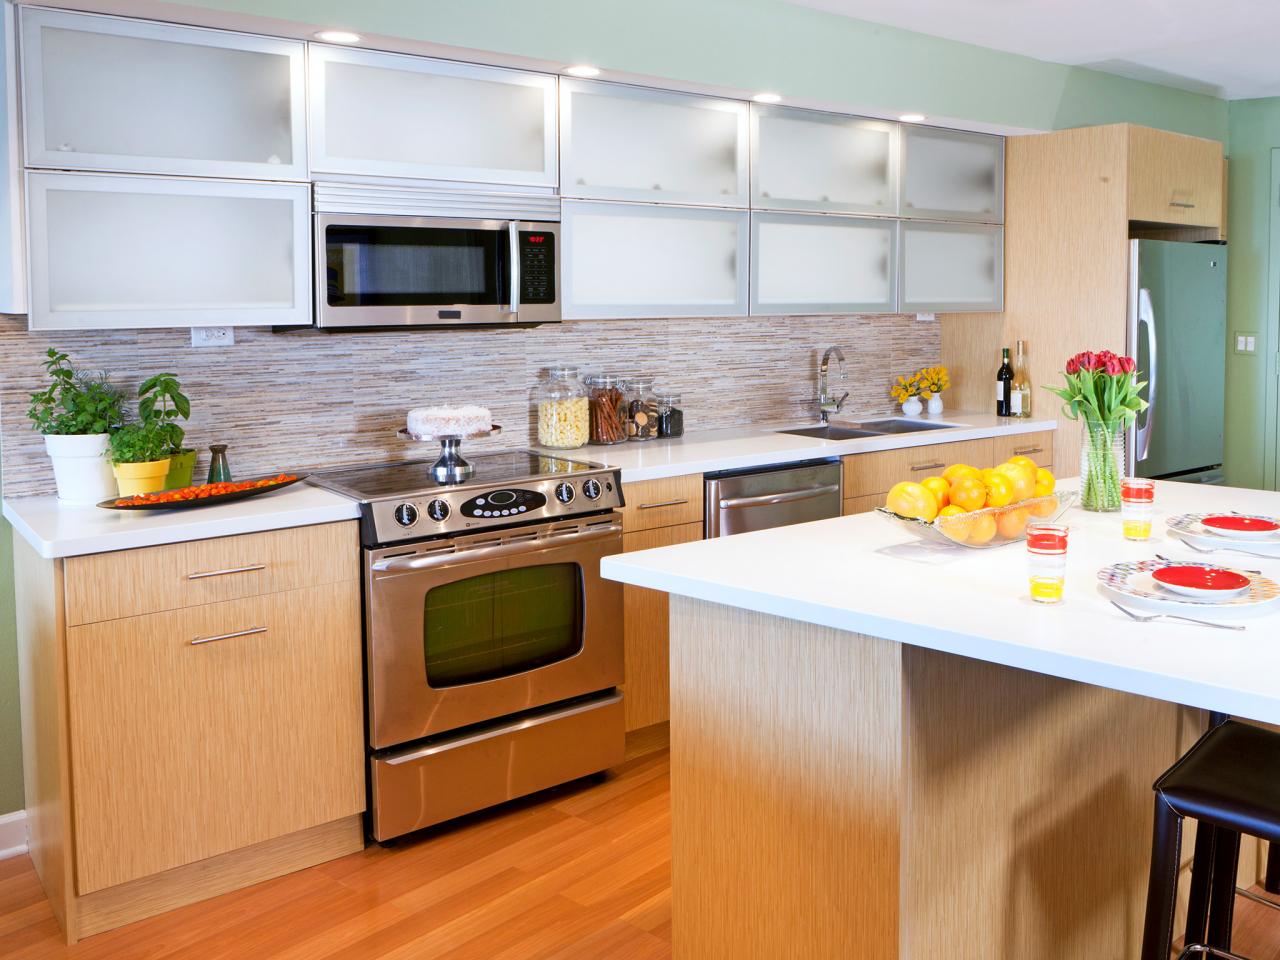 stock kitchen cabinets: pictures, ideas & tips from hgtv | hgtv